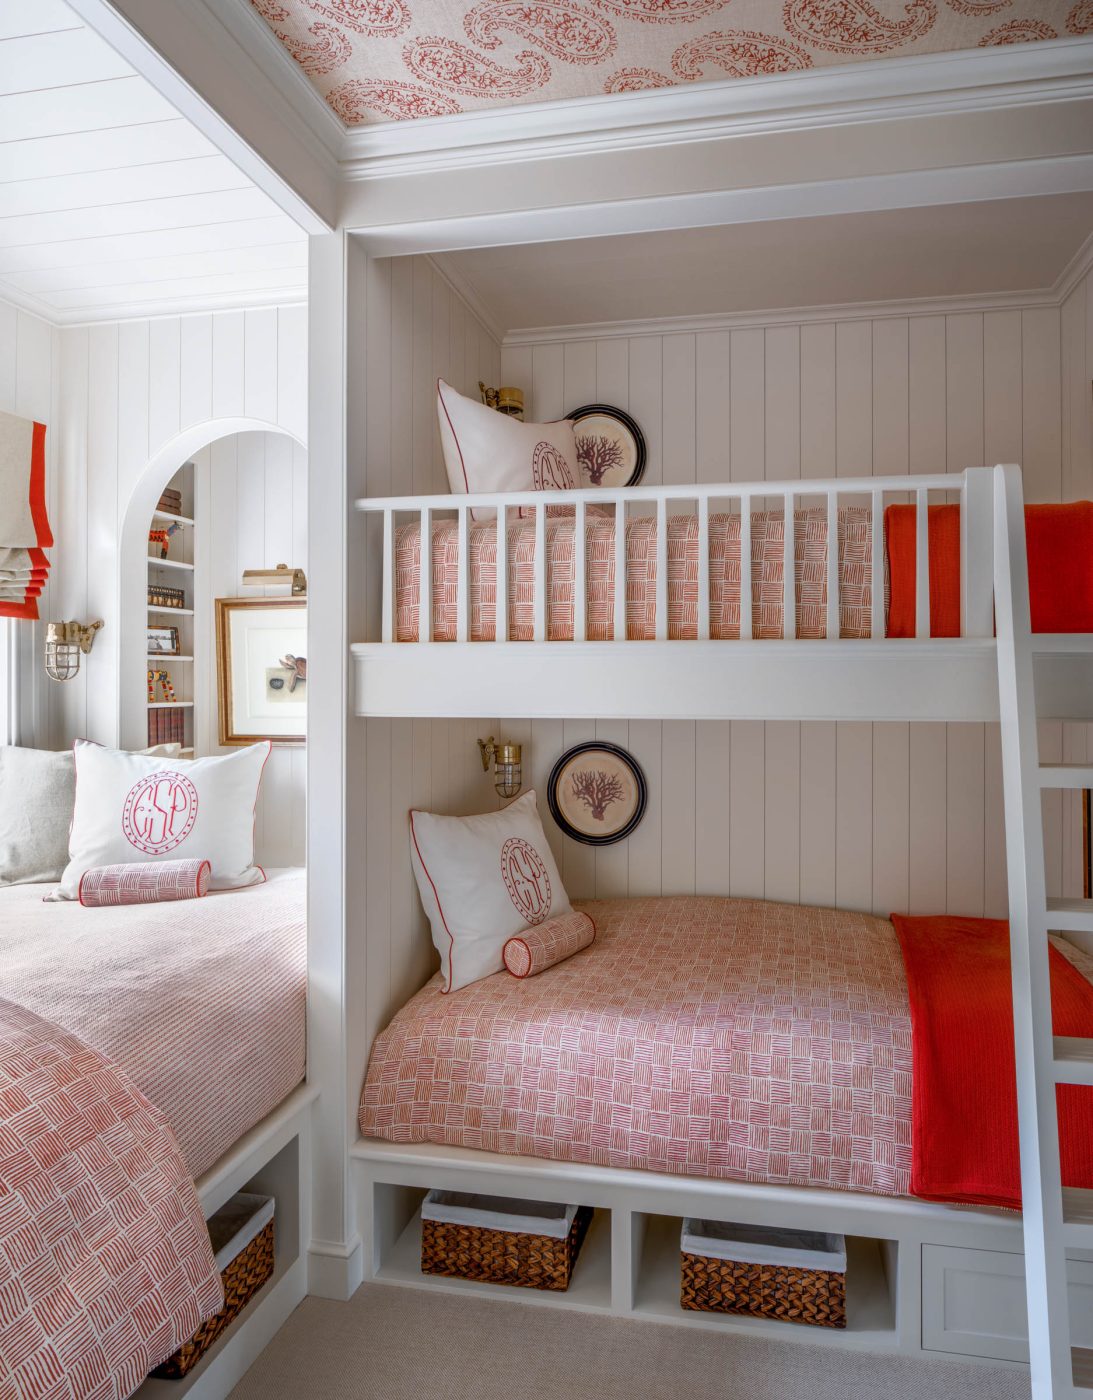 A narrow bedroom became a bunk room for the couple's grandchildren.